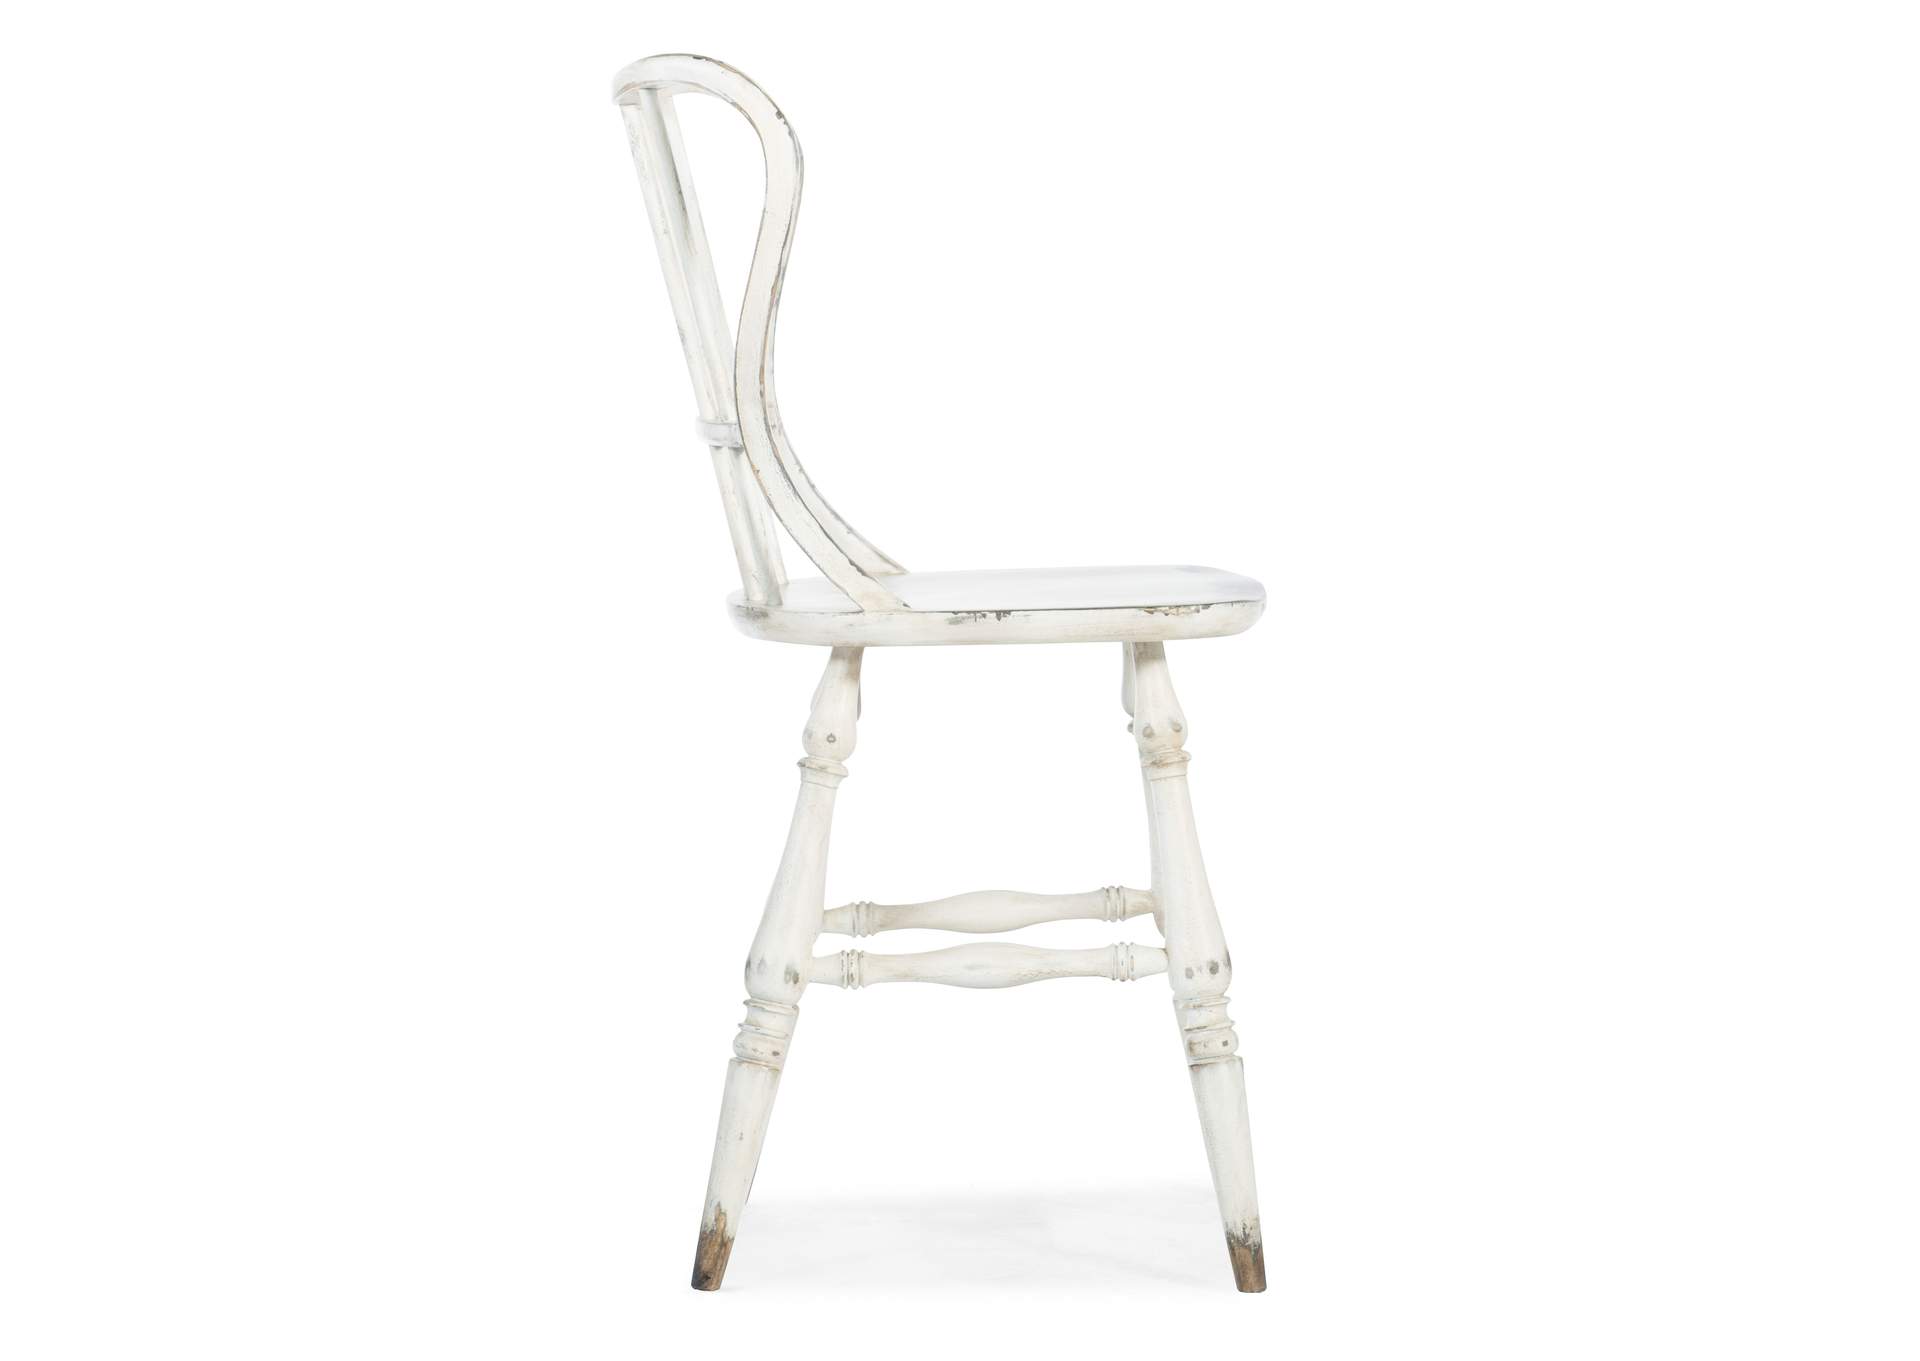 Ciao Bella Spindle Back Counter Stool - White,Hooker Furniture